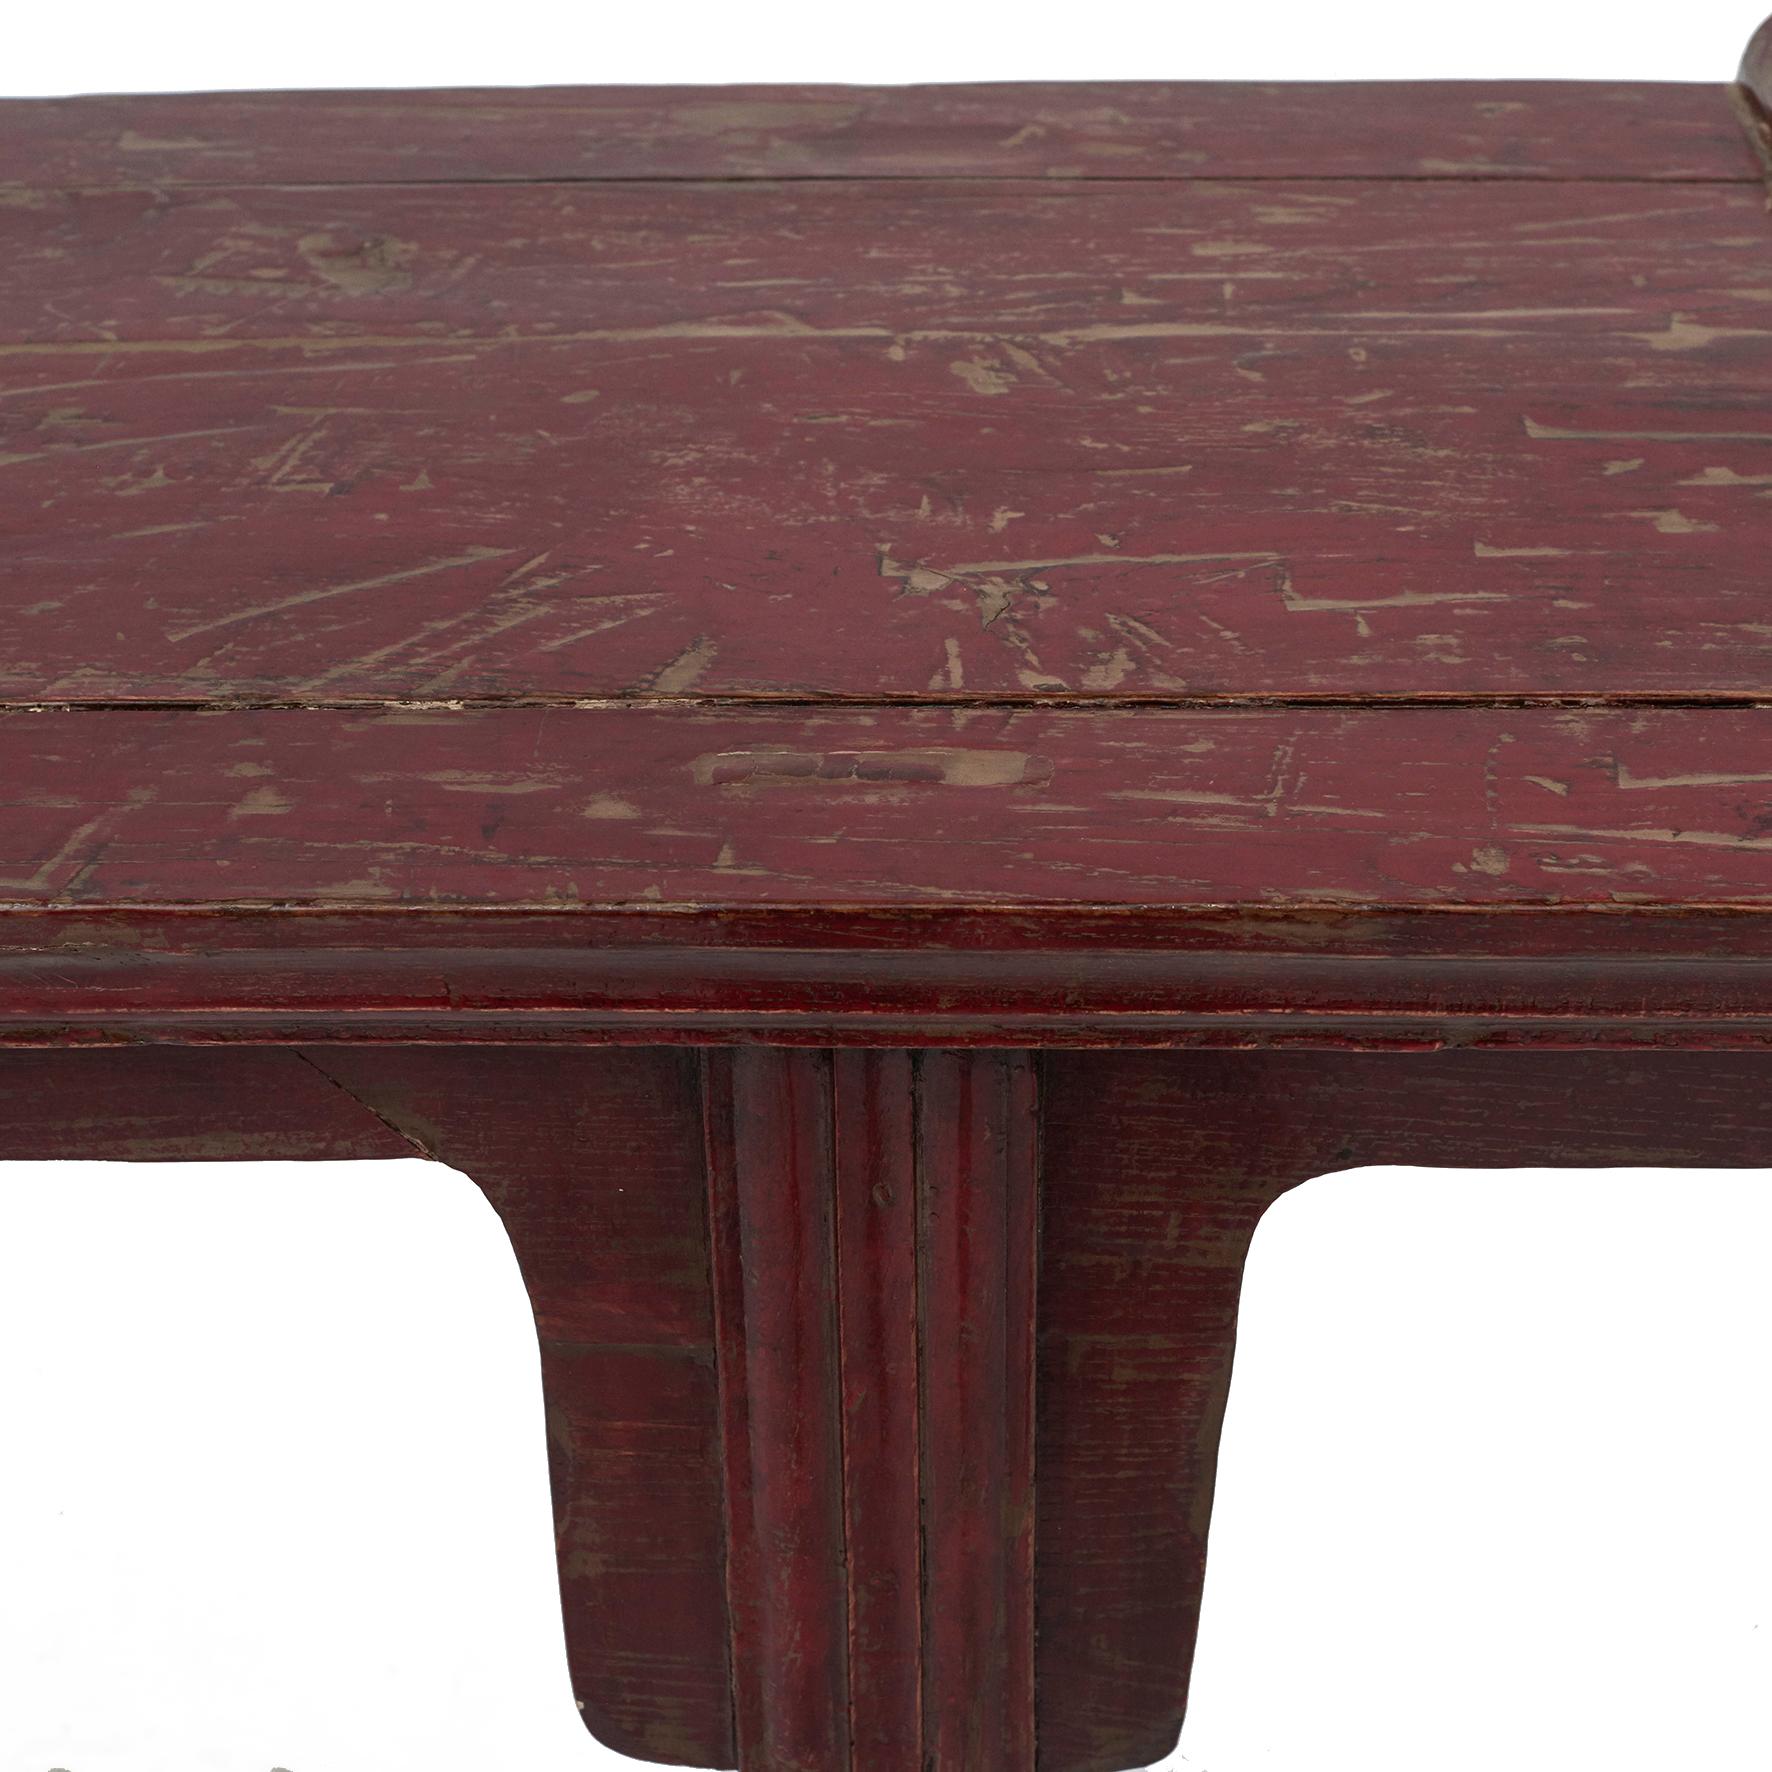 Lacquered Red Lacquer Altar / Console Table